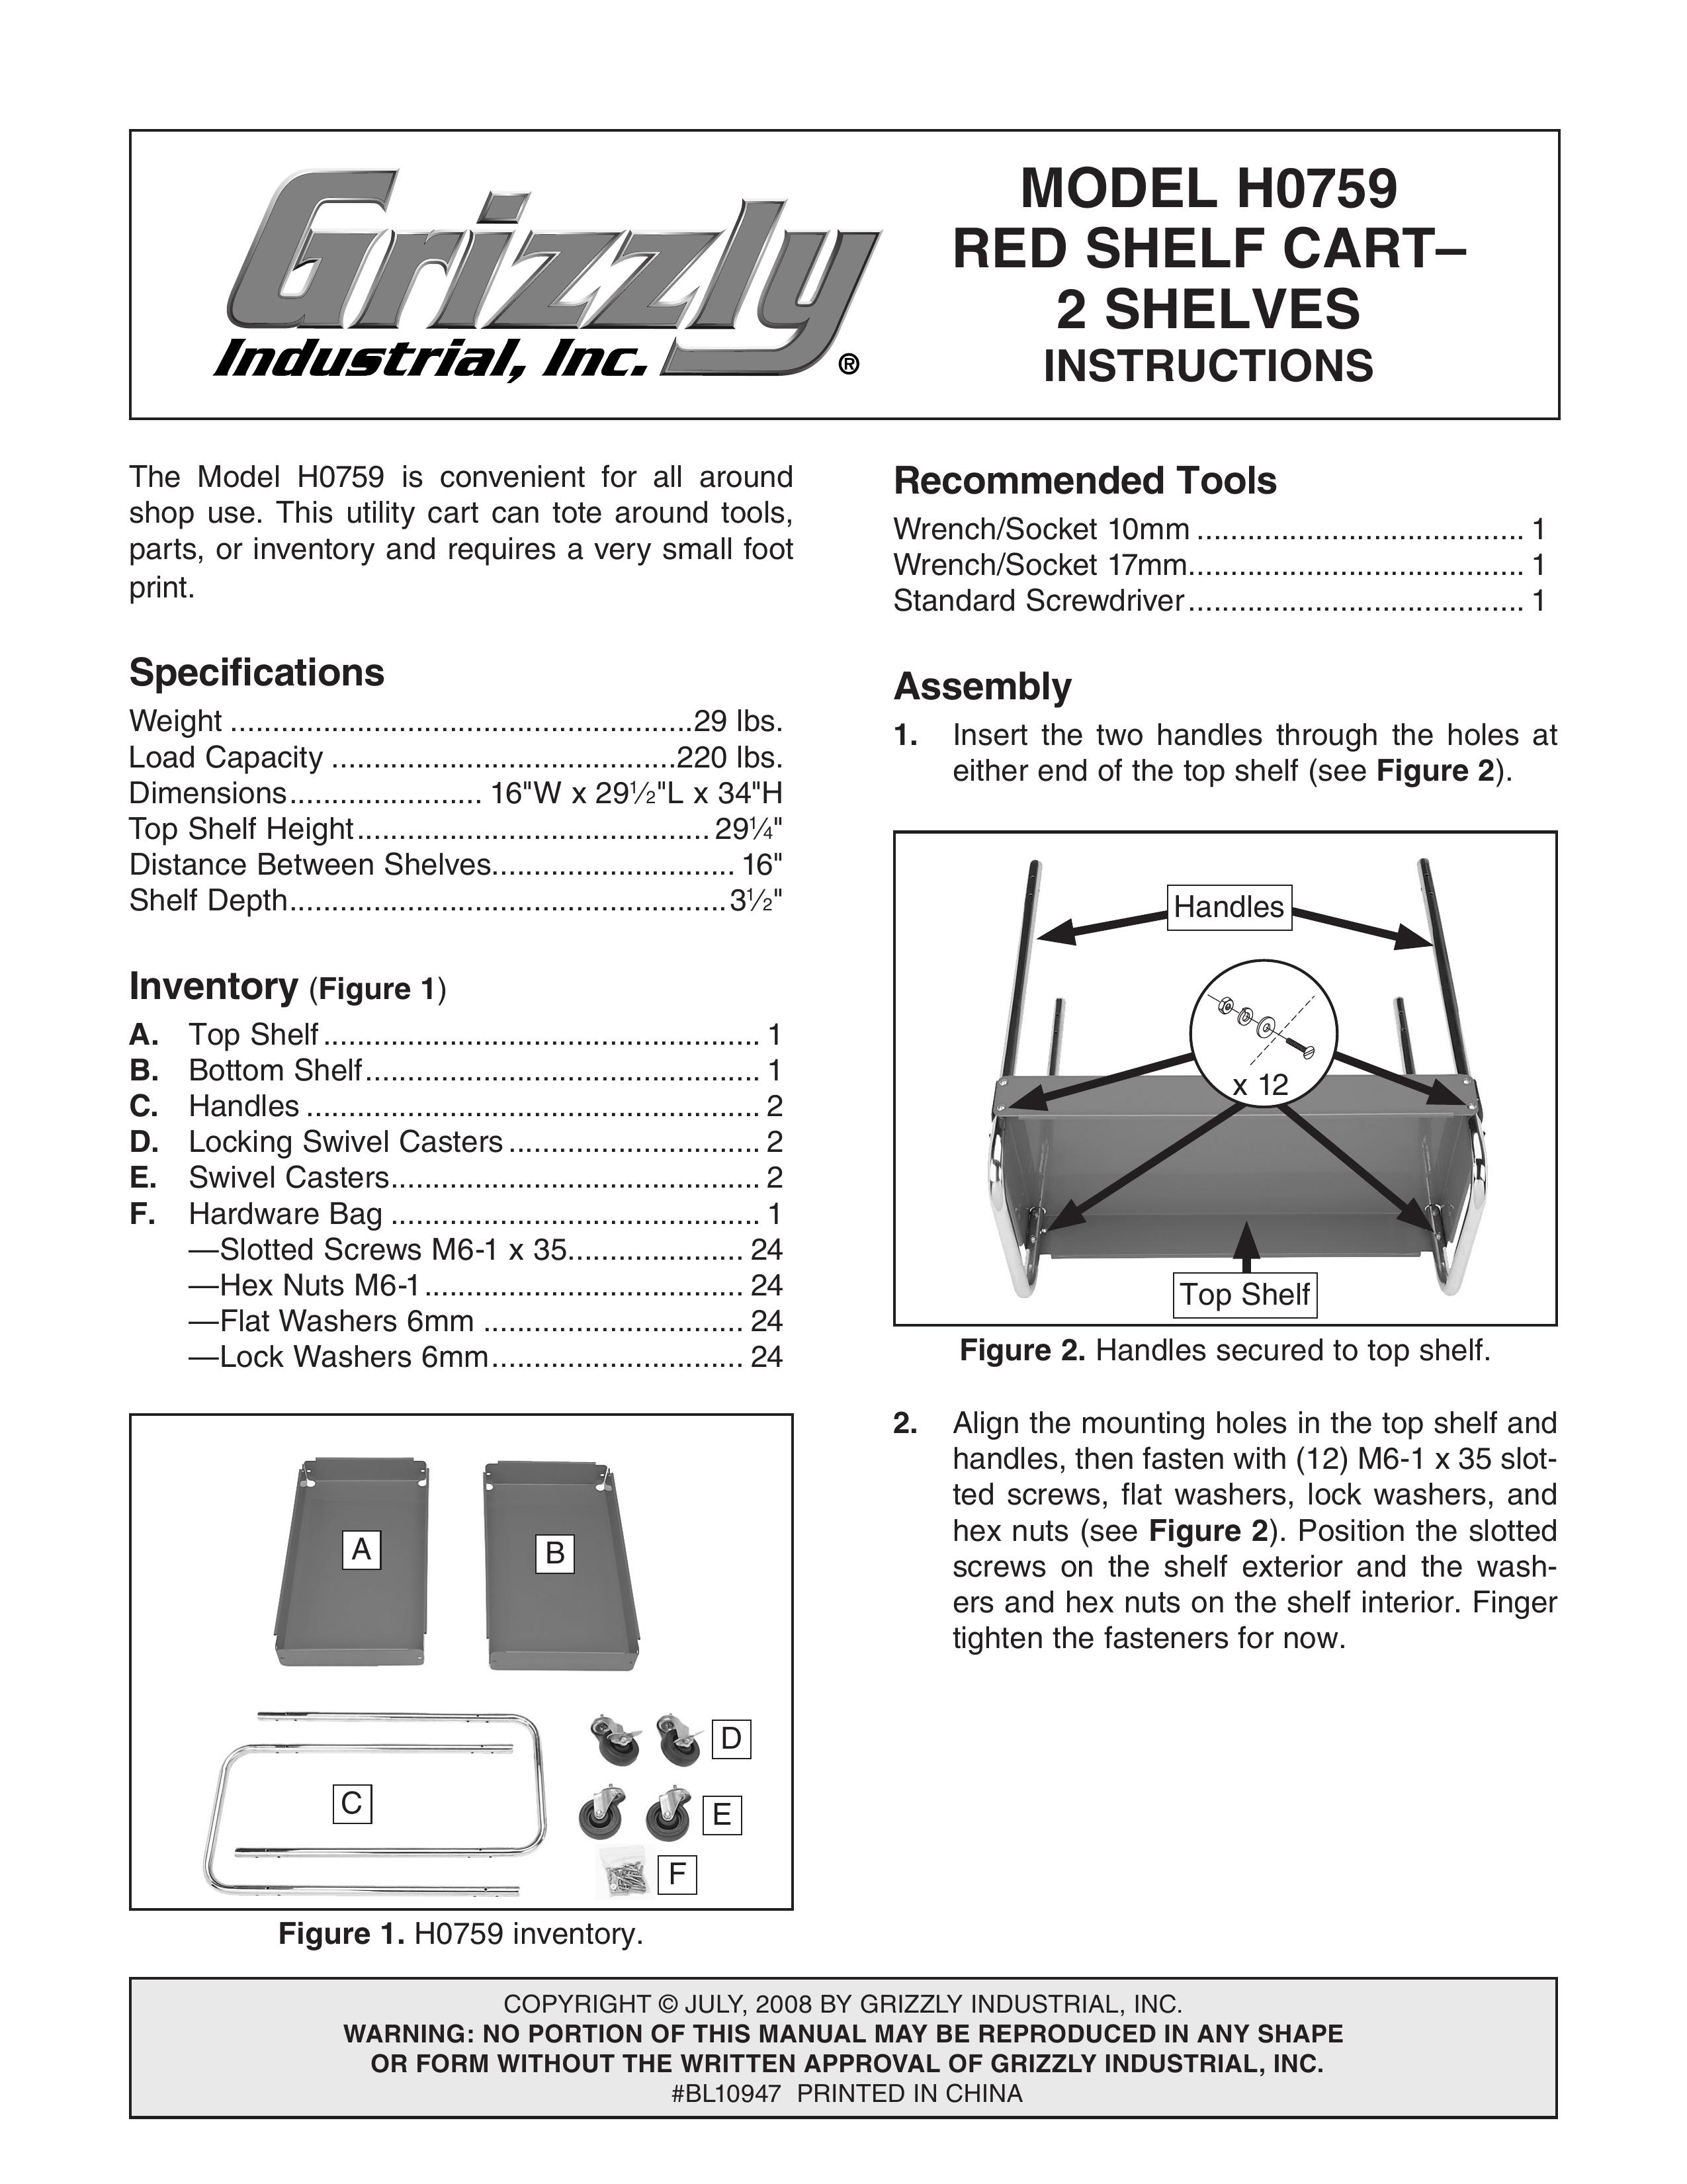 Grizzly H0759 Outdoor Cart User Manual